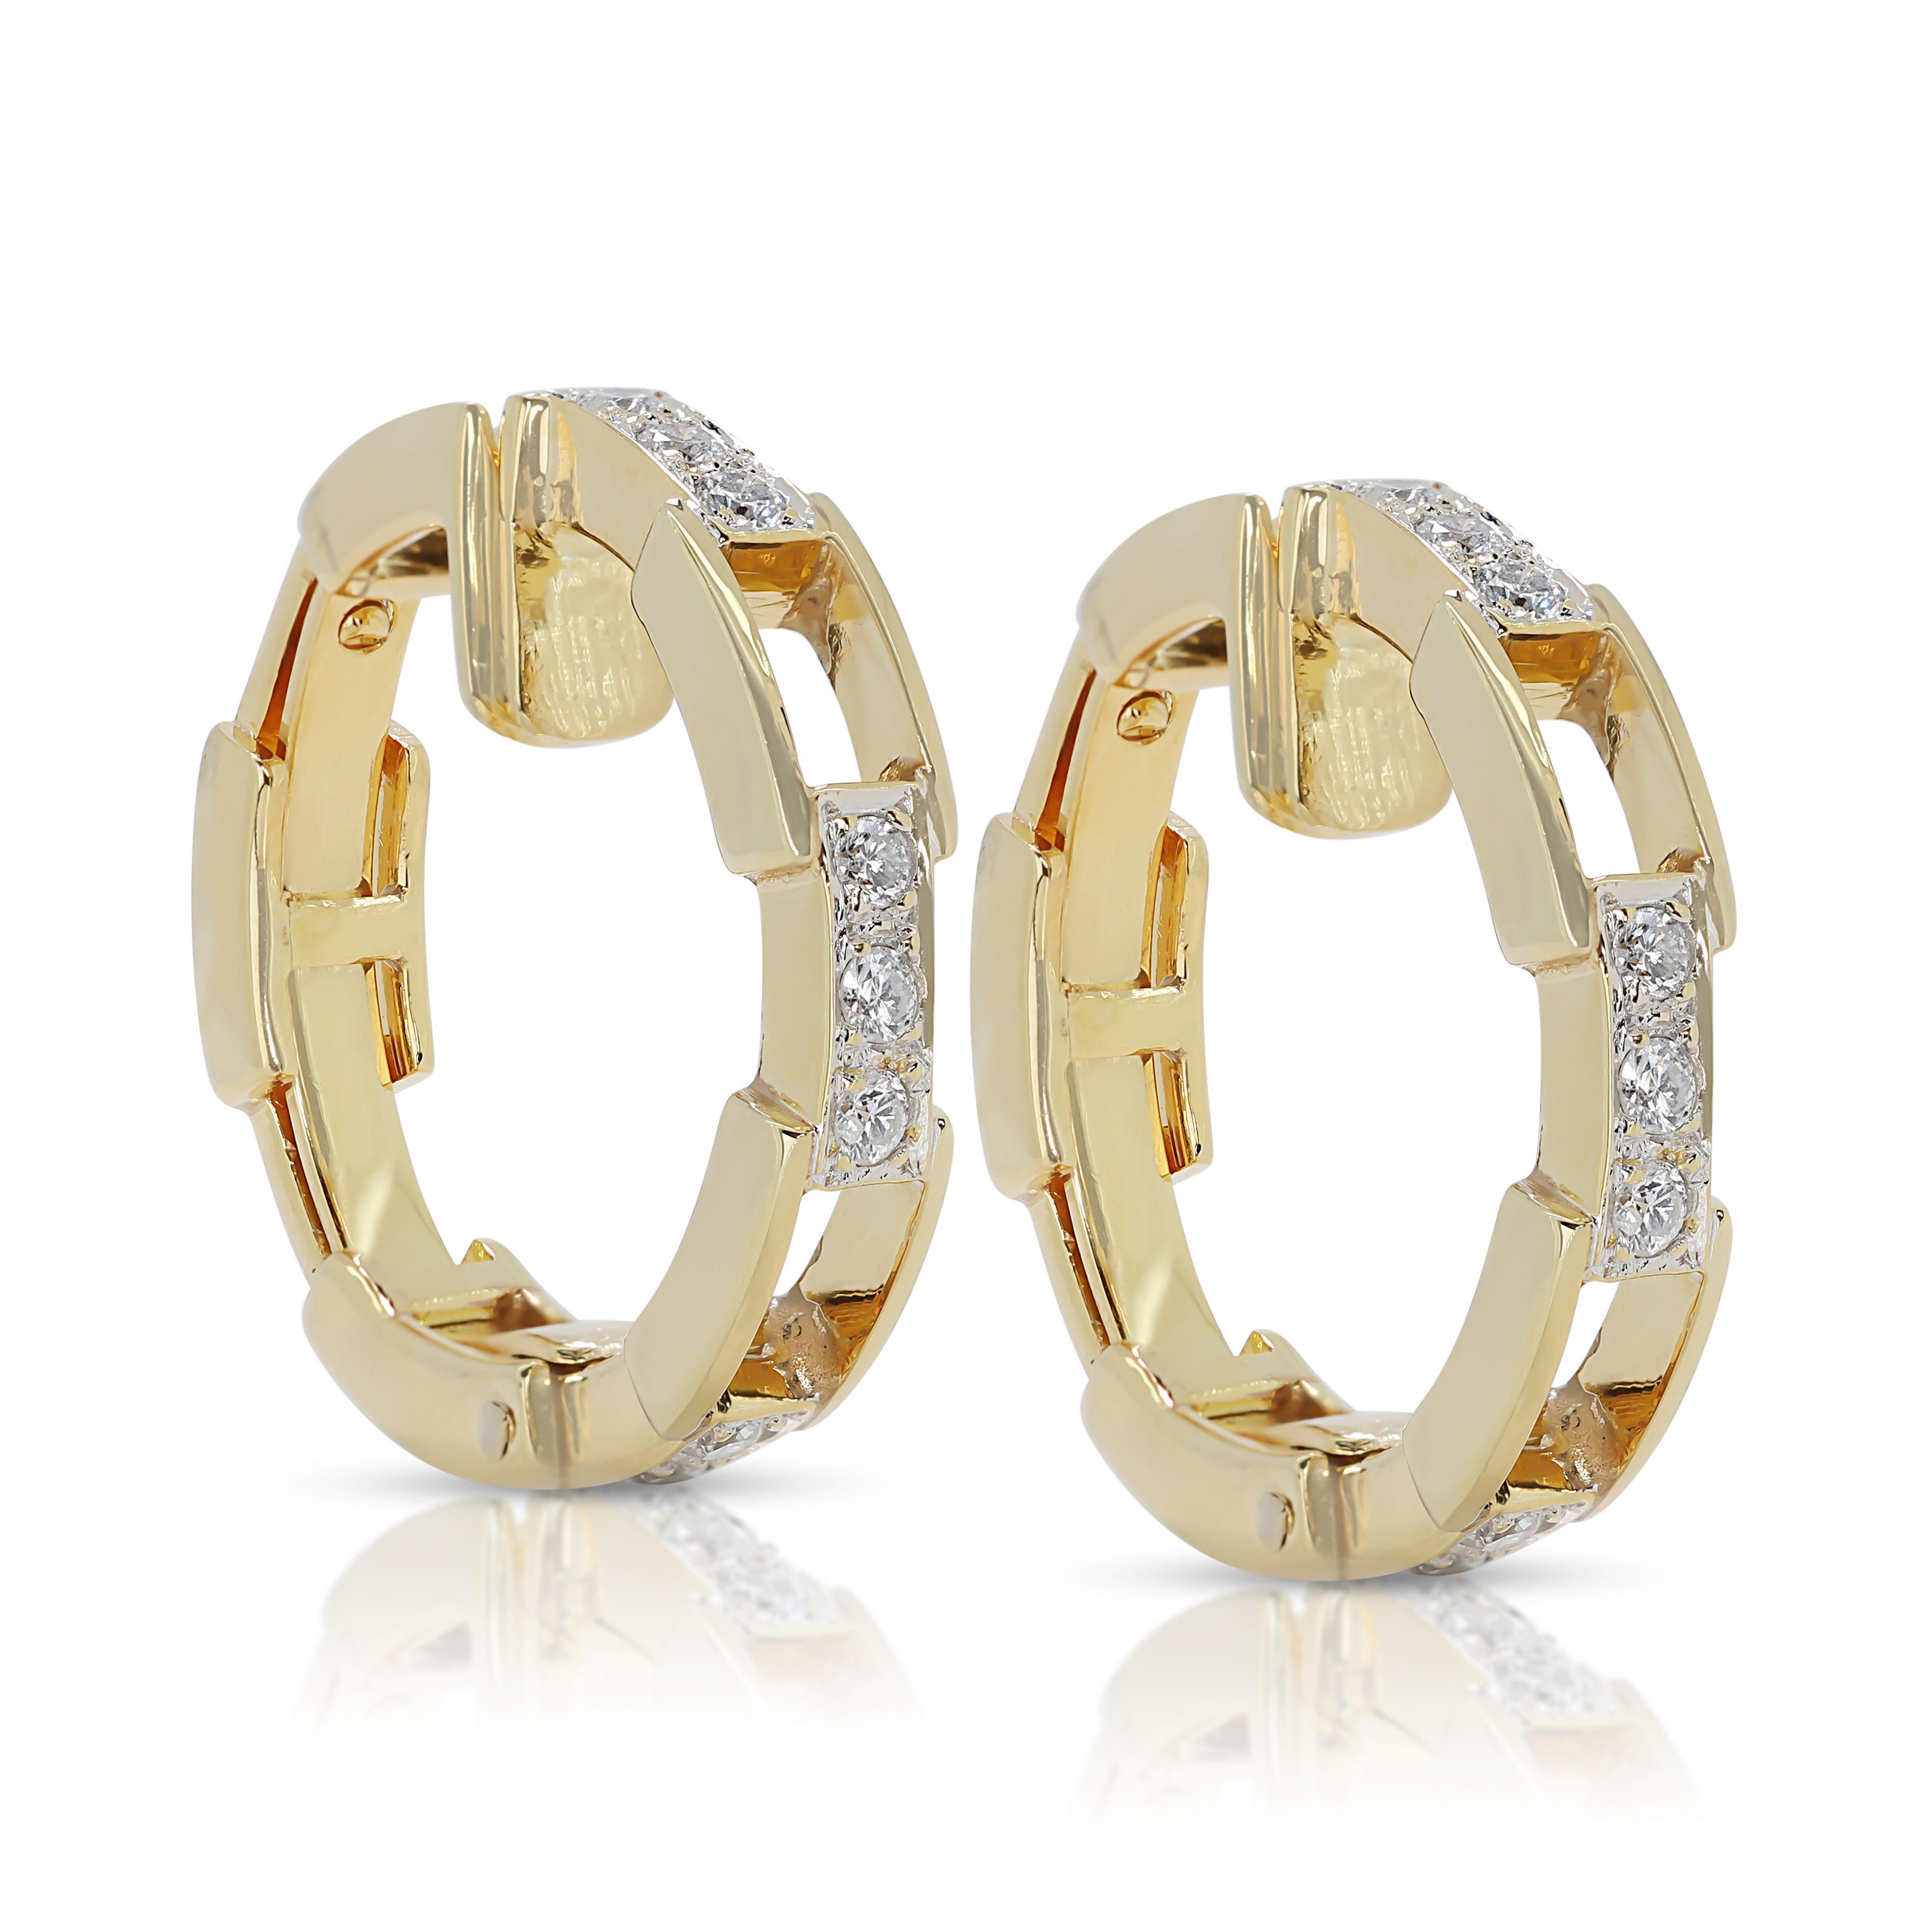 Captivating 0.30ct Diamonds Earrings in 14K Yellow Gold In Excellent Condition For Sale In רמת גן, IL